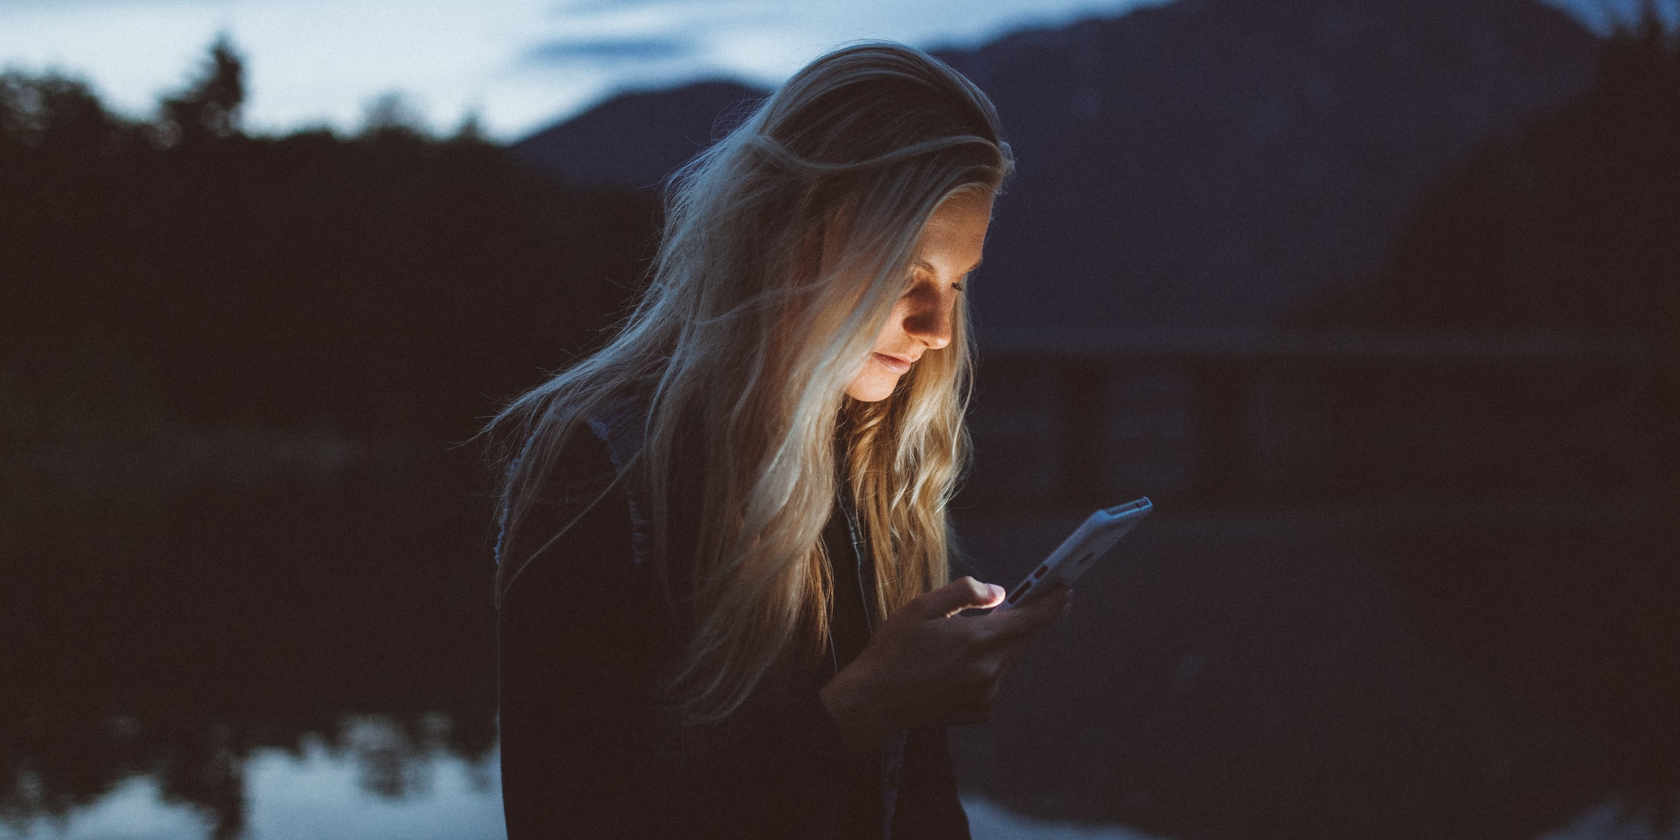 A blonde woman at night by a lake. Her face is illuminated by the light from her phone